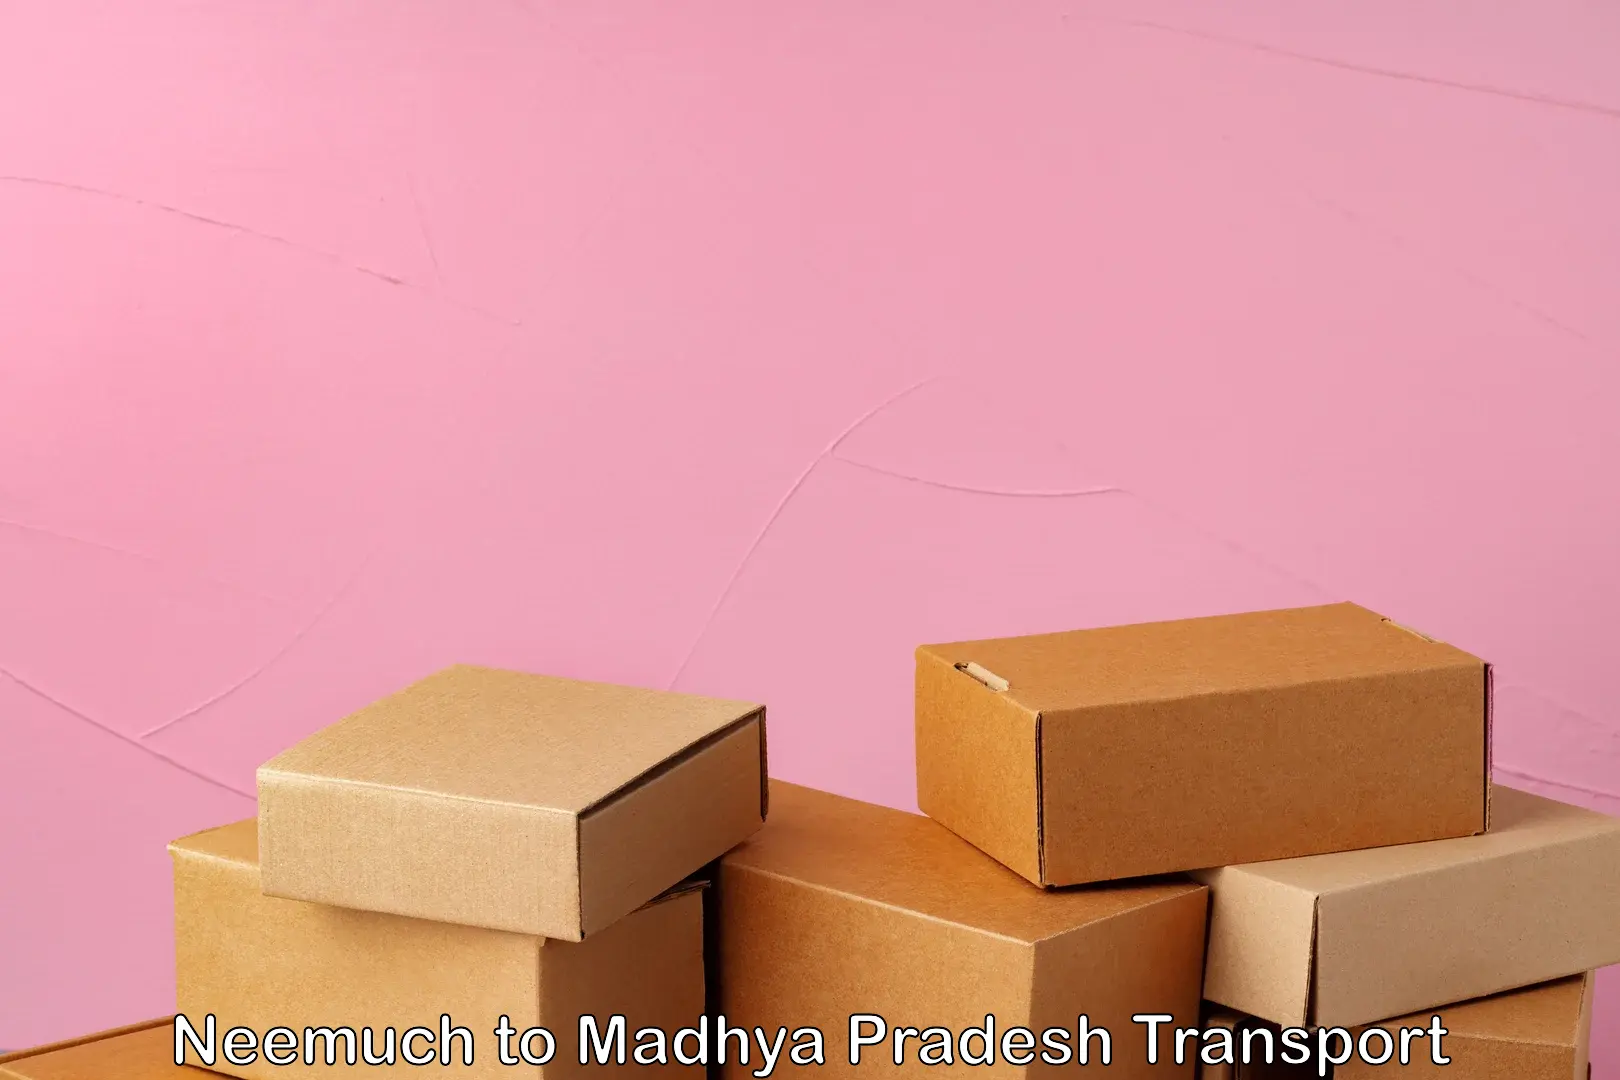 Commercial transport service Neemuch to Madhya Pradesh